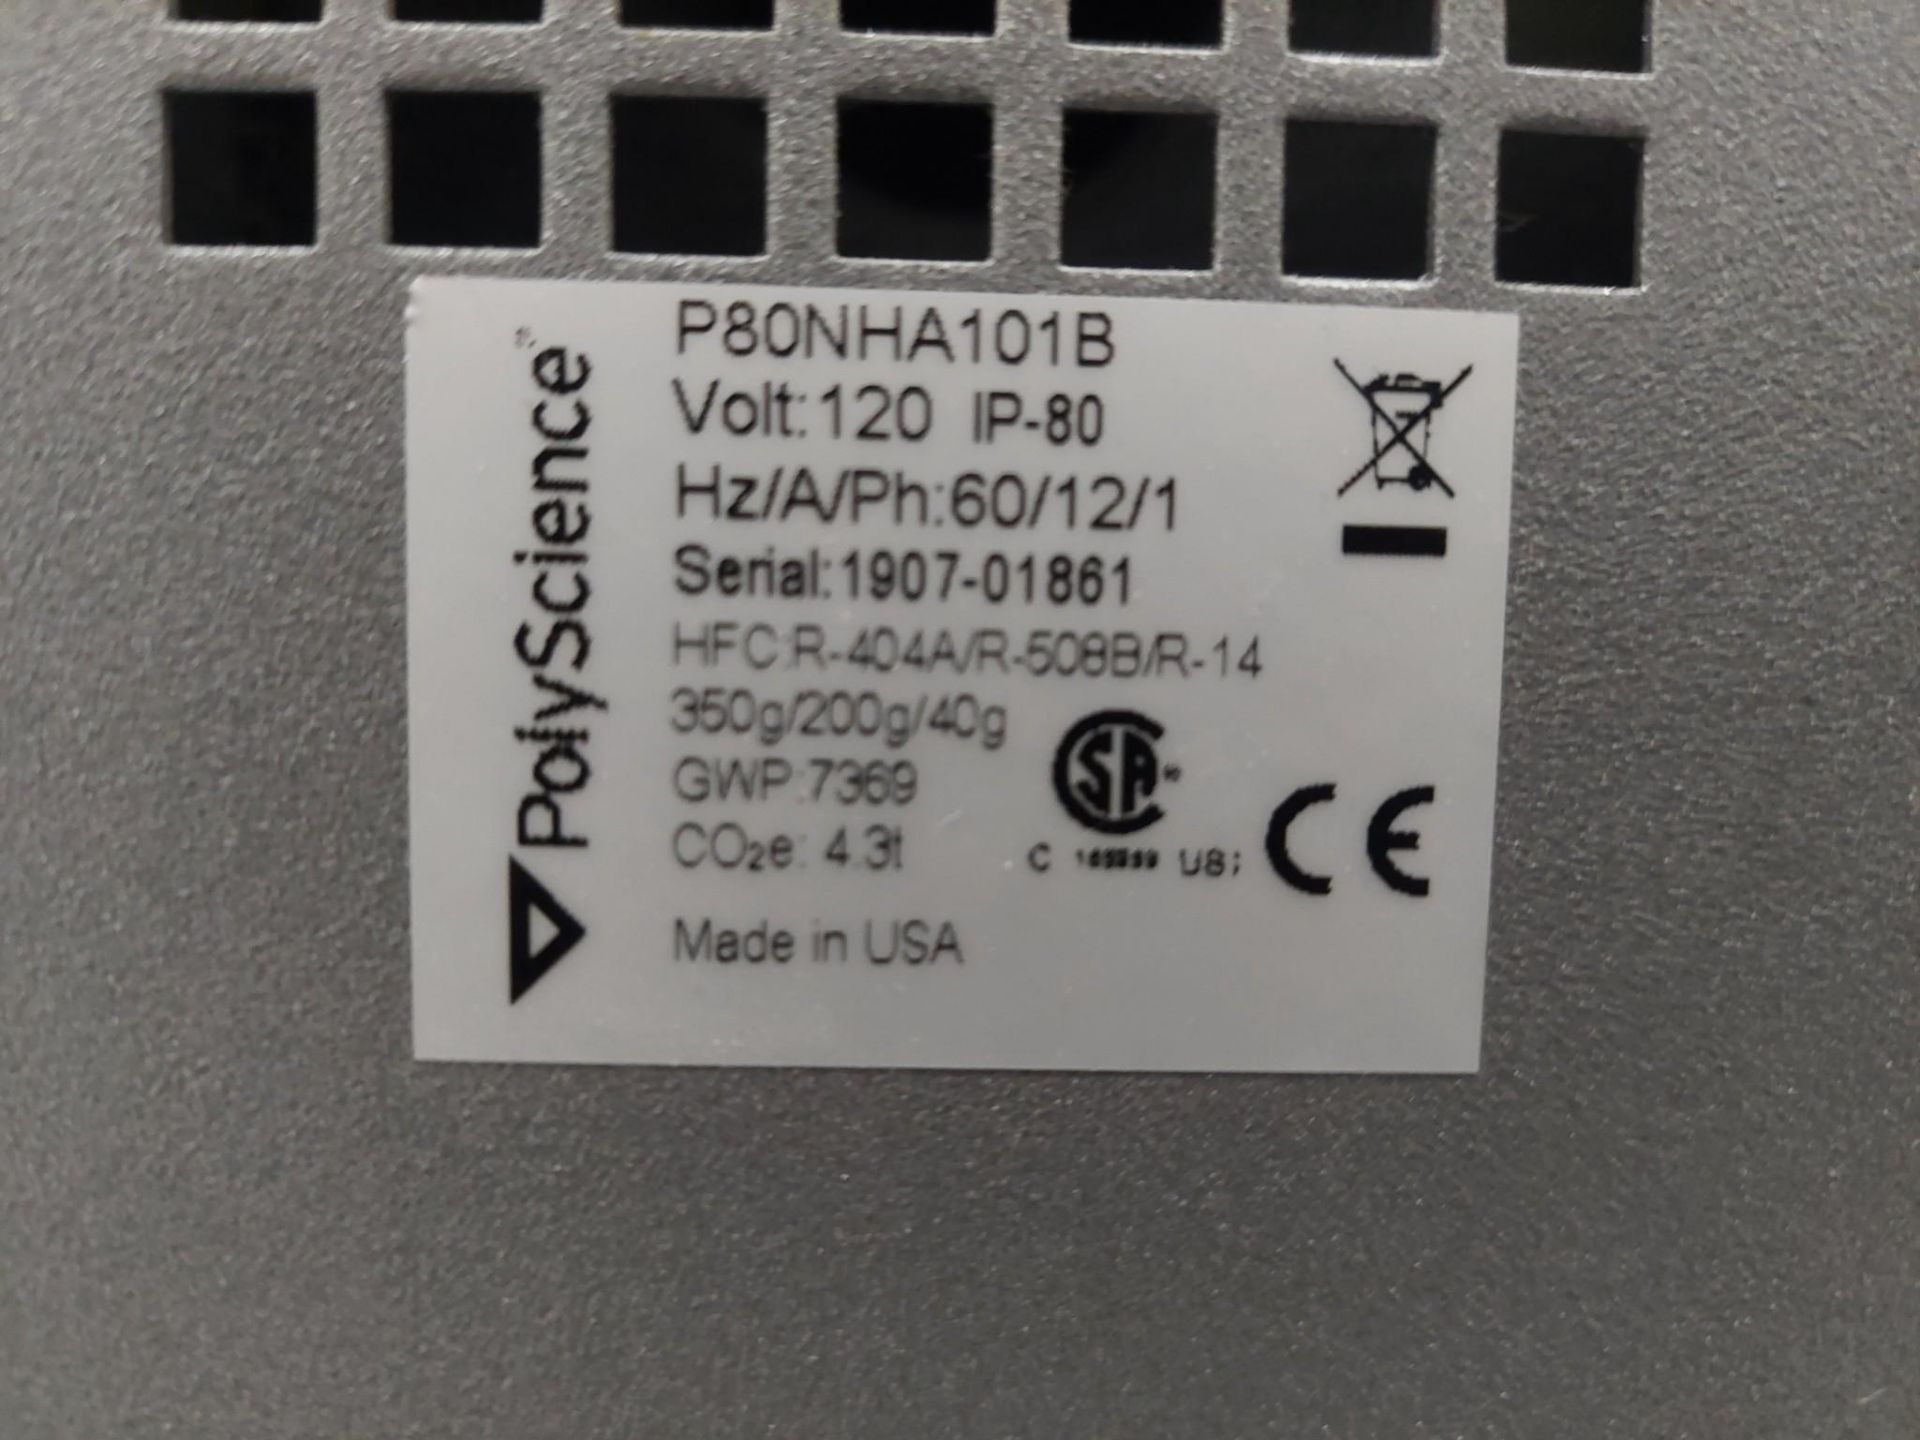 POLYSCIENCE P80NHA101B IP-80 IMMERSION PROBE CHILLER. 1.75" PROBE. 2019 YEAR - Image 7 of 7